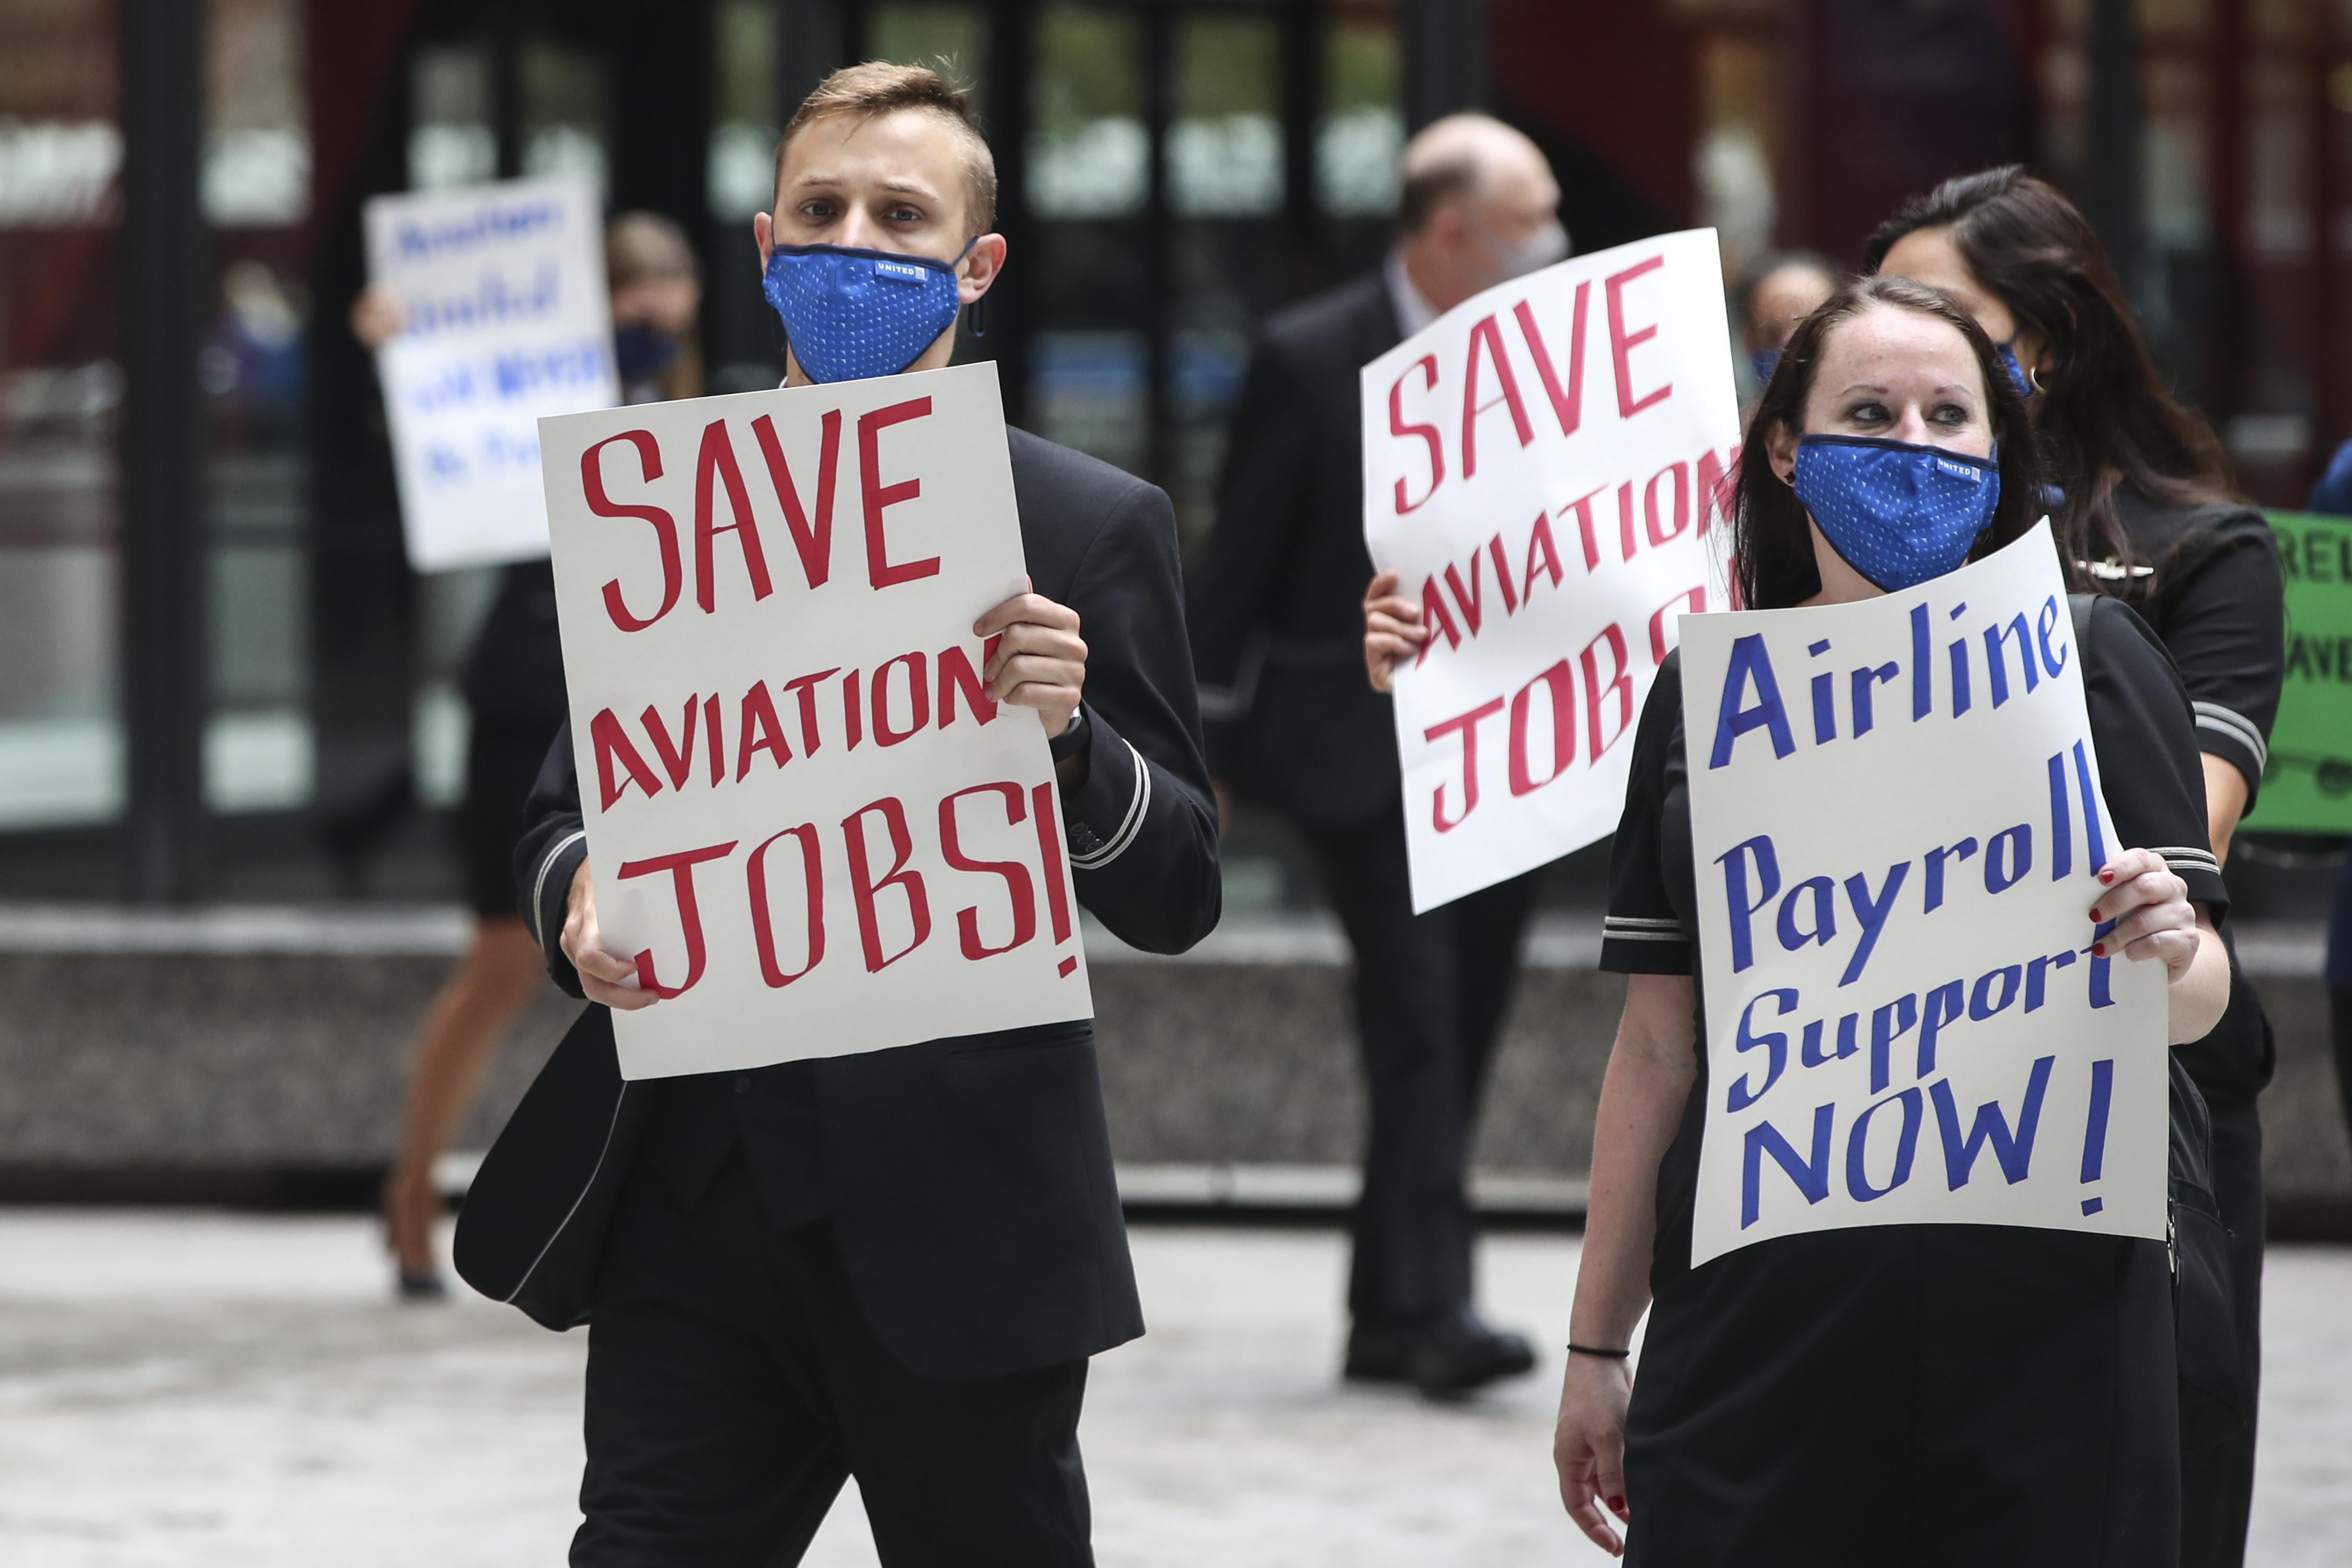 Protesters hold up signs that say "SAVE AVIATION JOBS" and "Airline Payroll Support Now!"